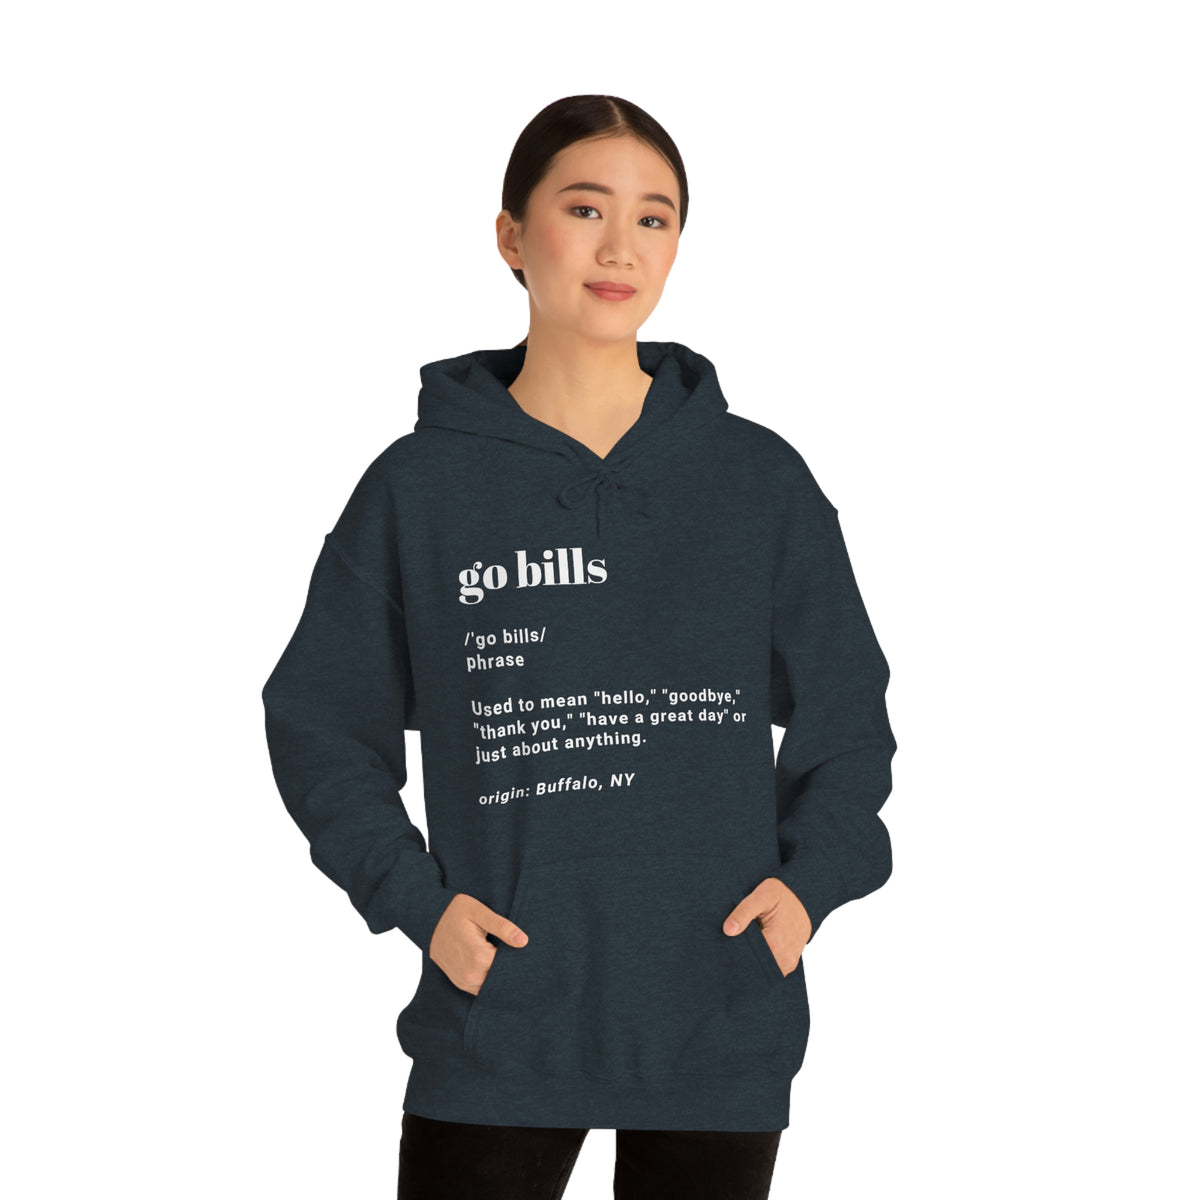 Go Bills definition hoodie in navy paired with black leggings.